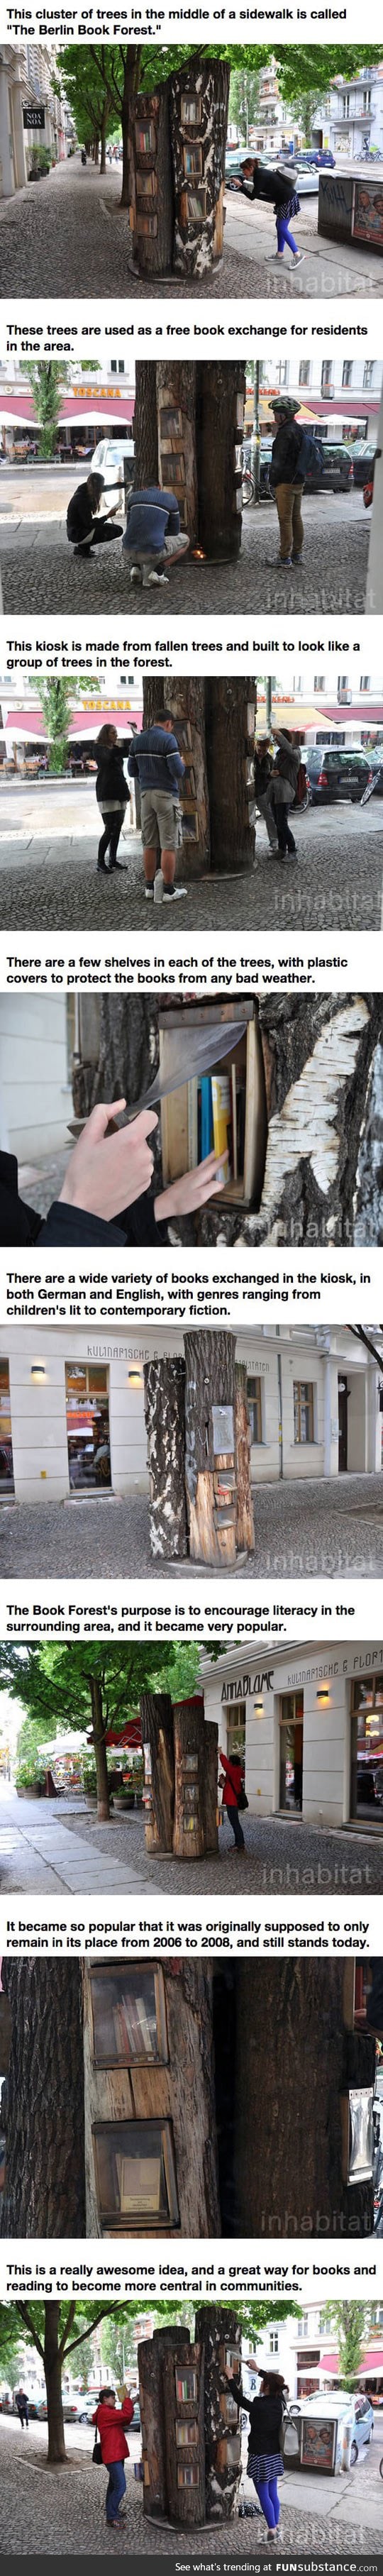 The book forest in Berlin